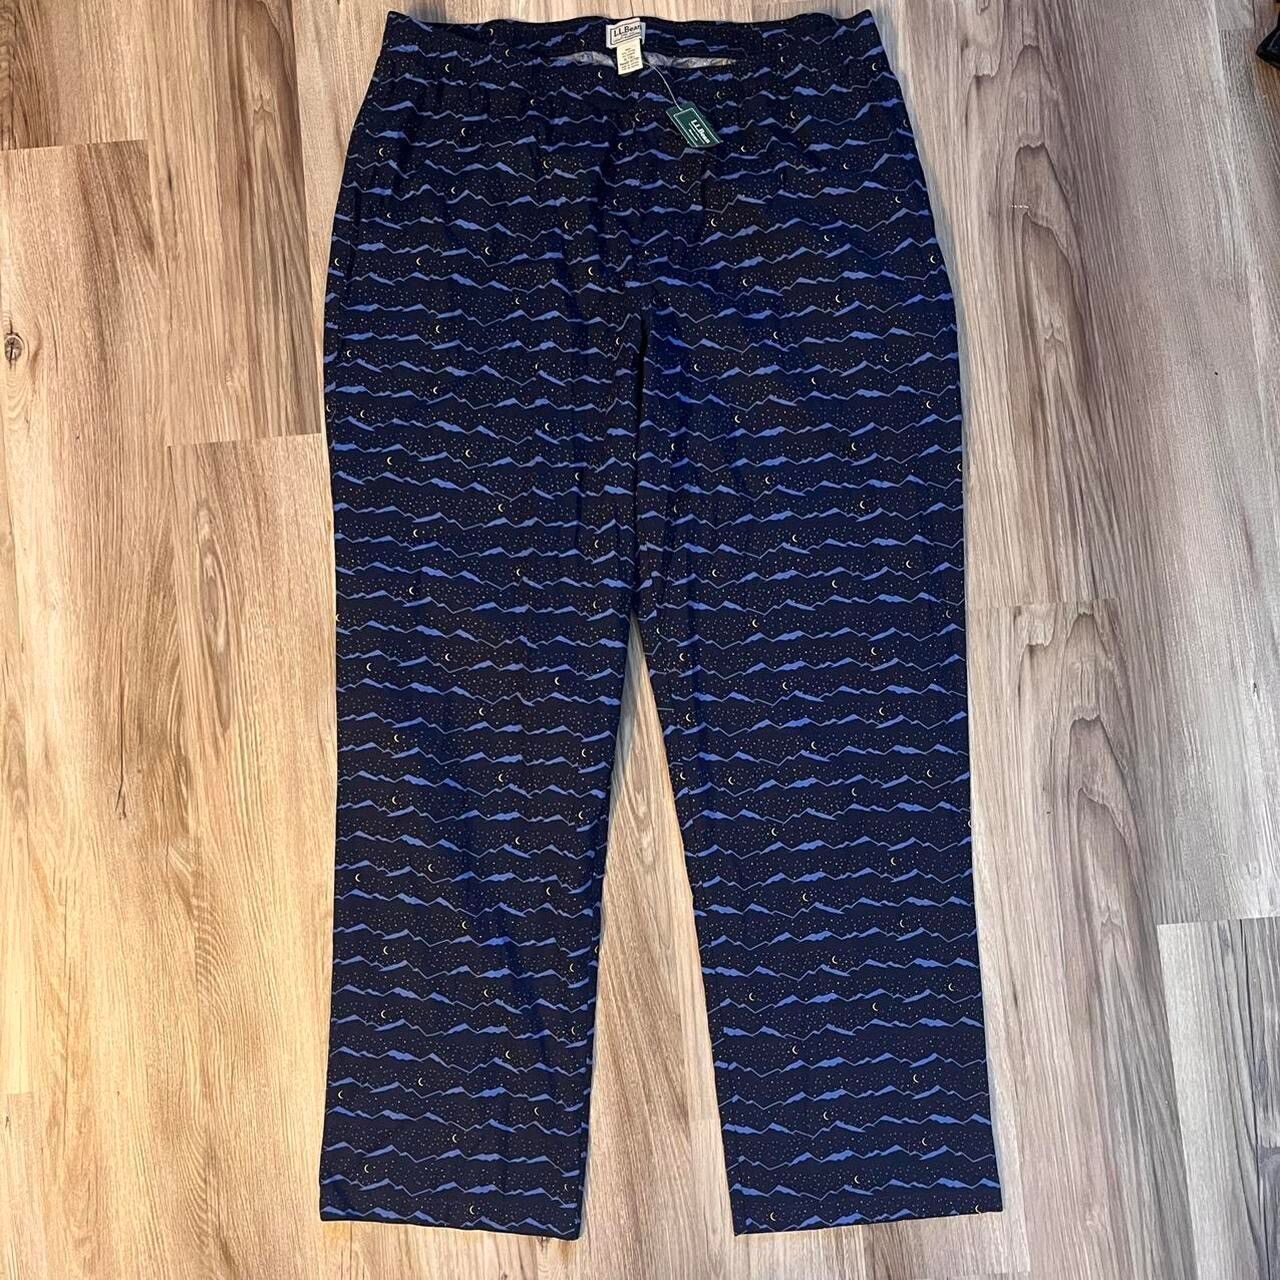 Vintage NWT L.L.Bean Mens Comfort Stretch Pajama Pants Moon and Star Size US 32 / EU 48 - 1 Preview